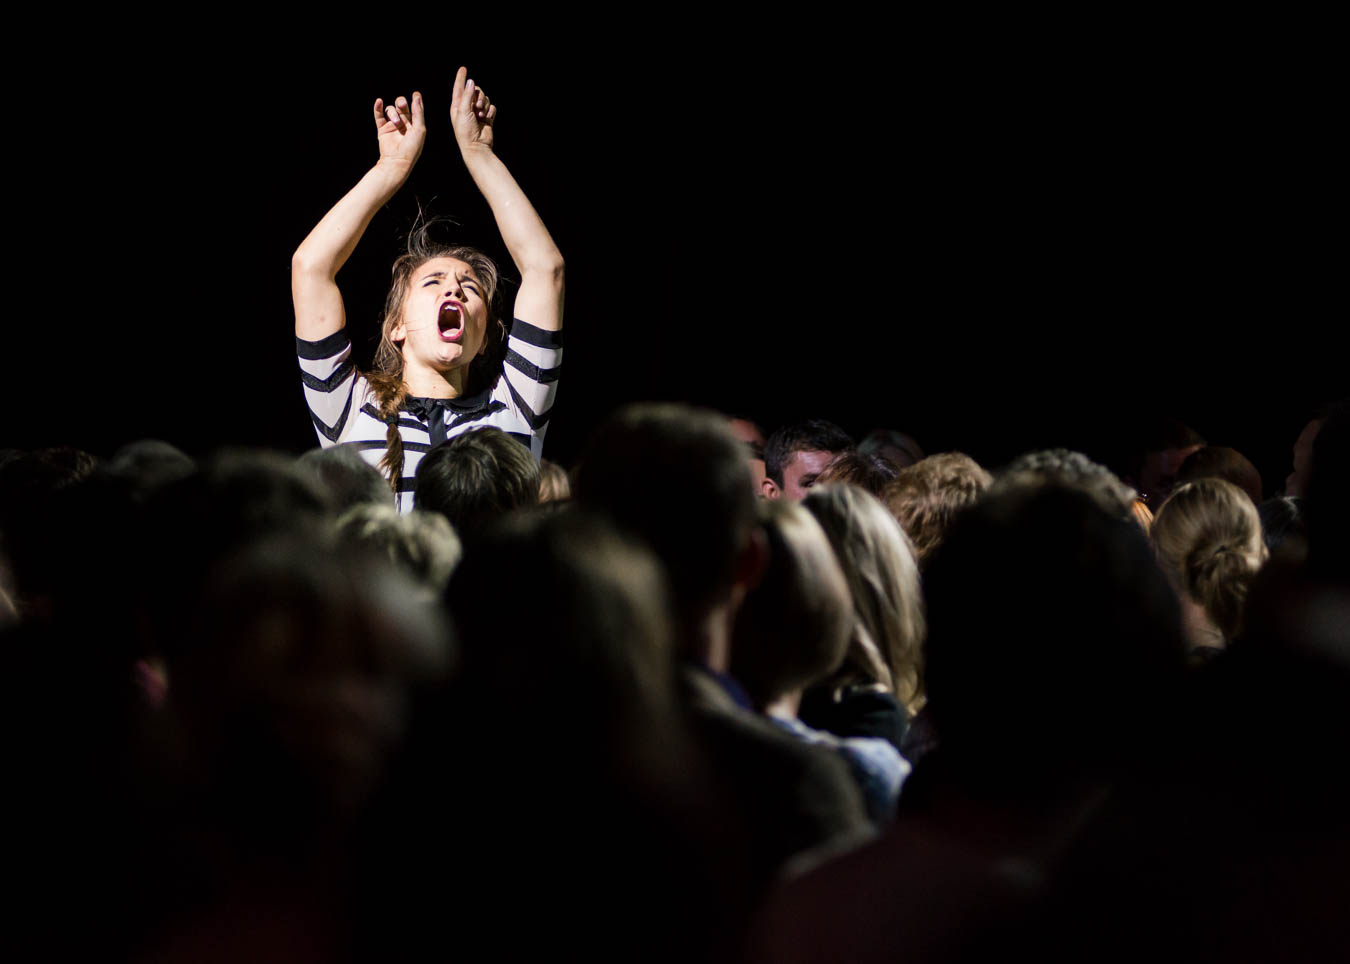 Performer and audience at Edinburgh Fringe show